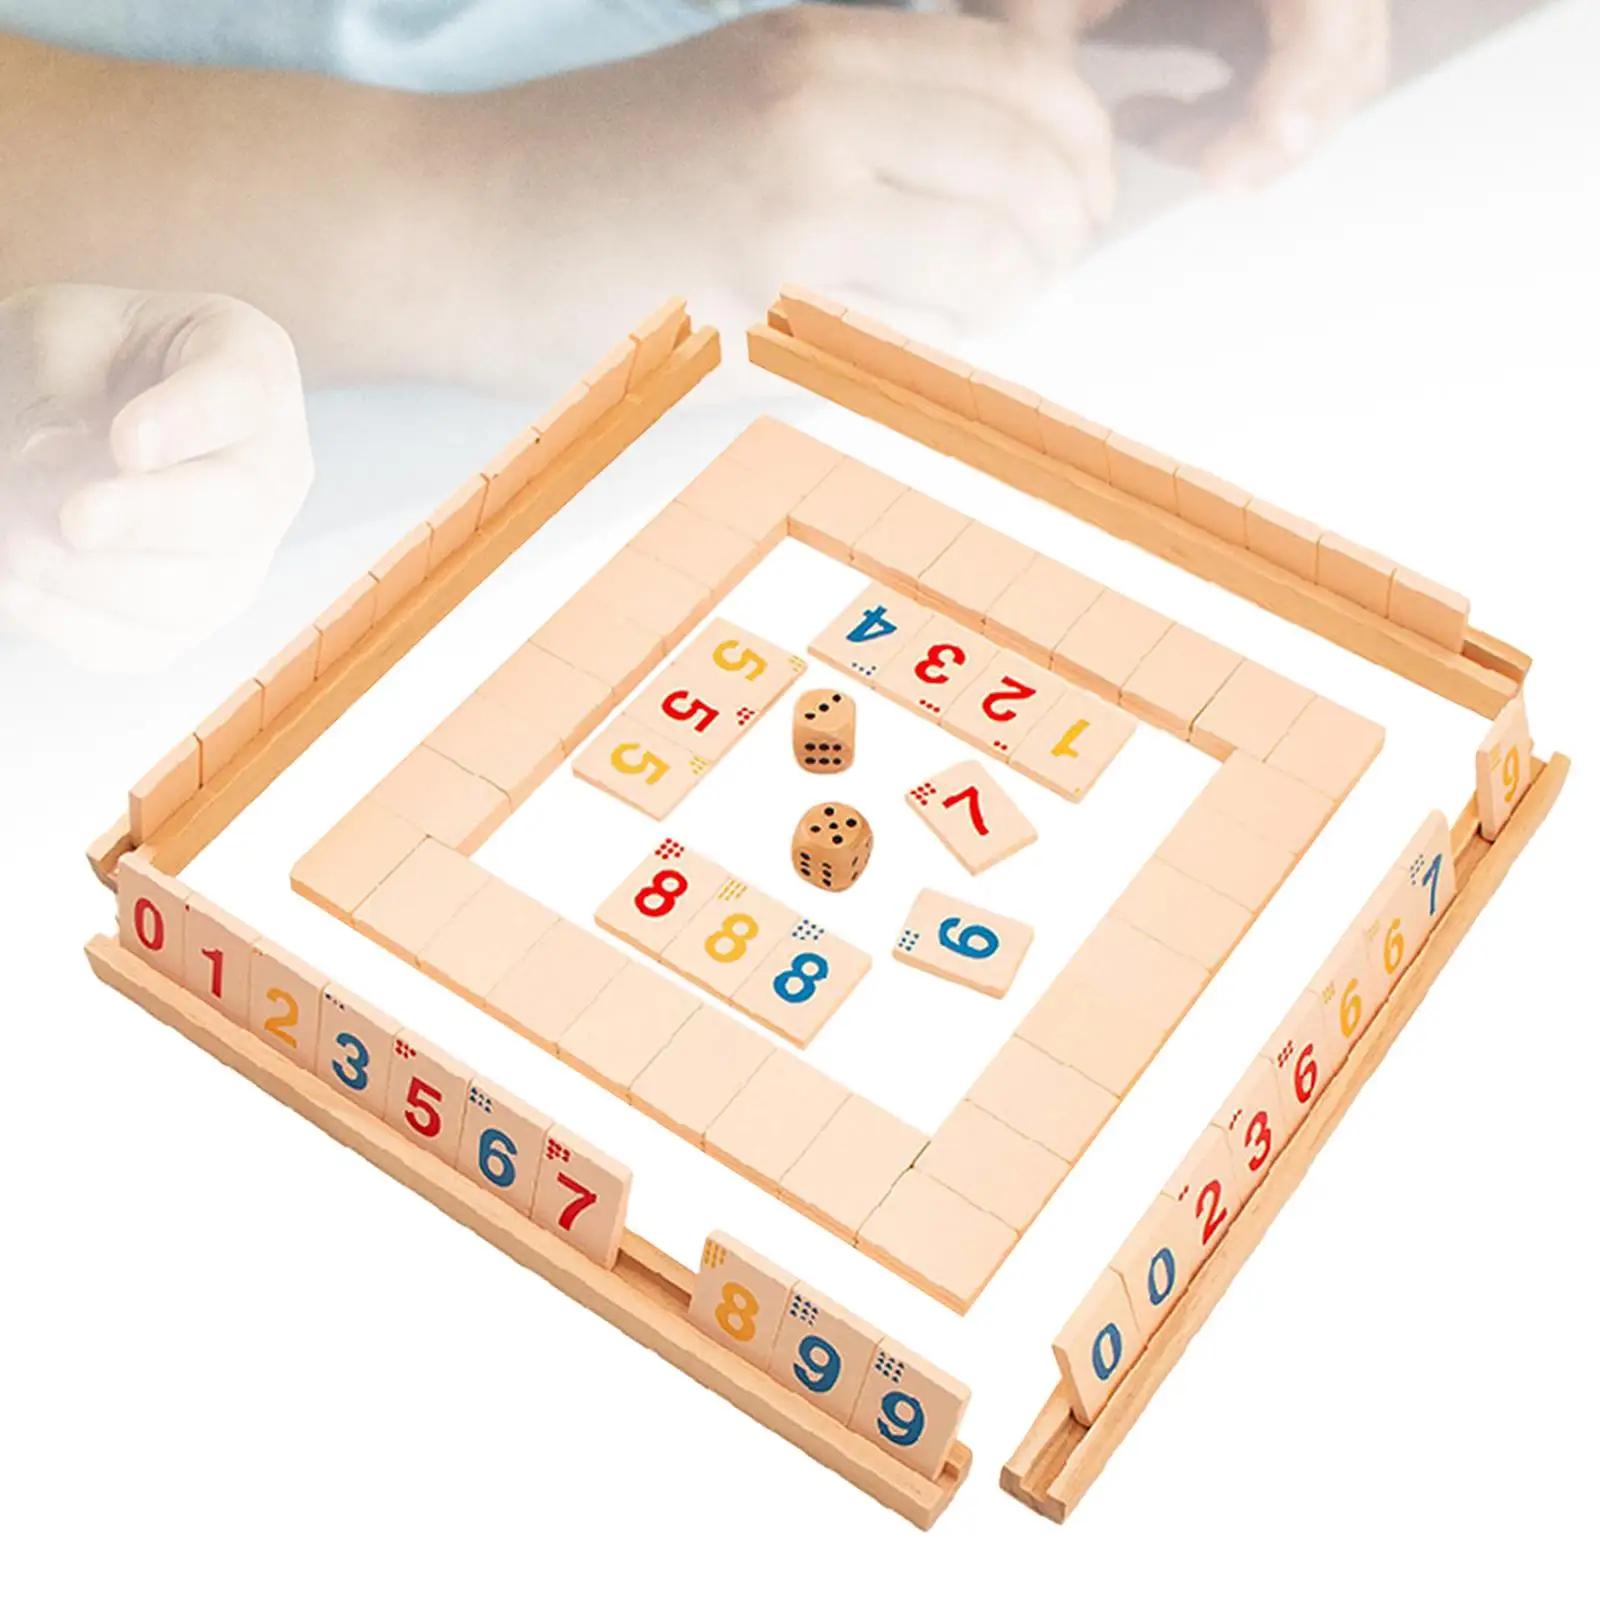 Sturdy 2-4 People Mahjong Digital Game Educational Toys Fast Moving Tile for Kids